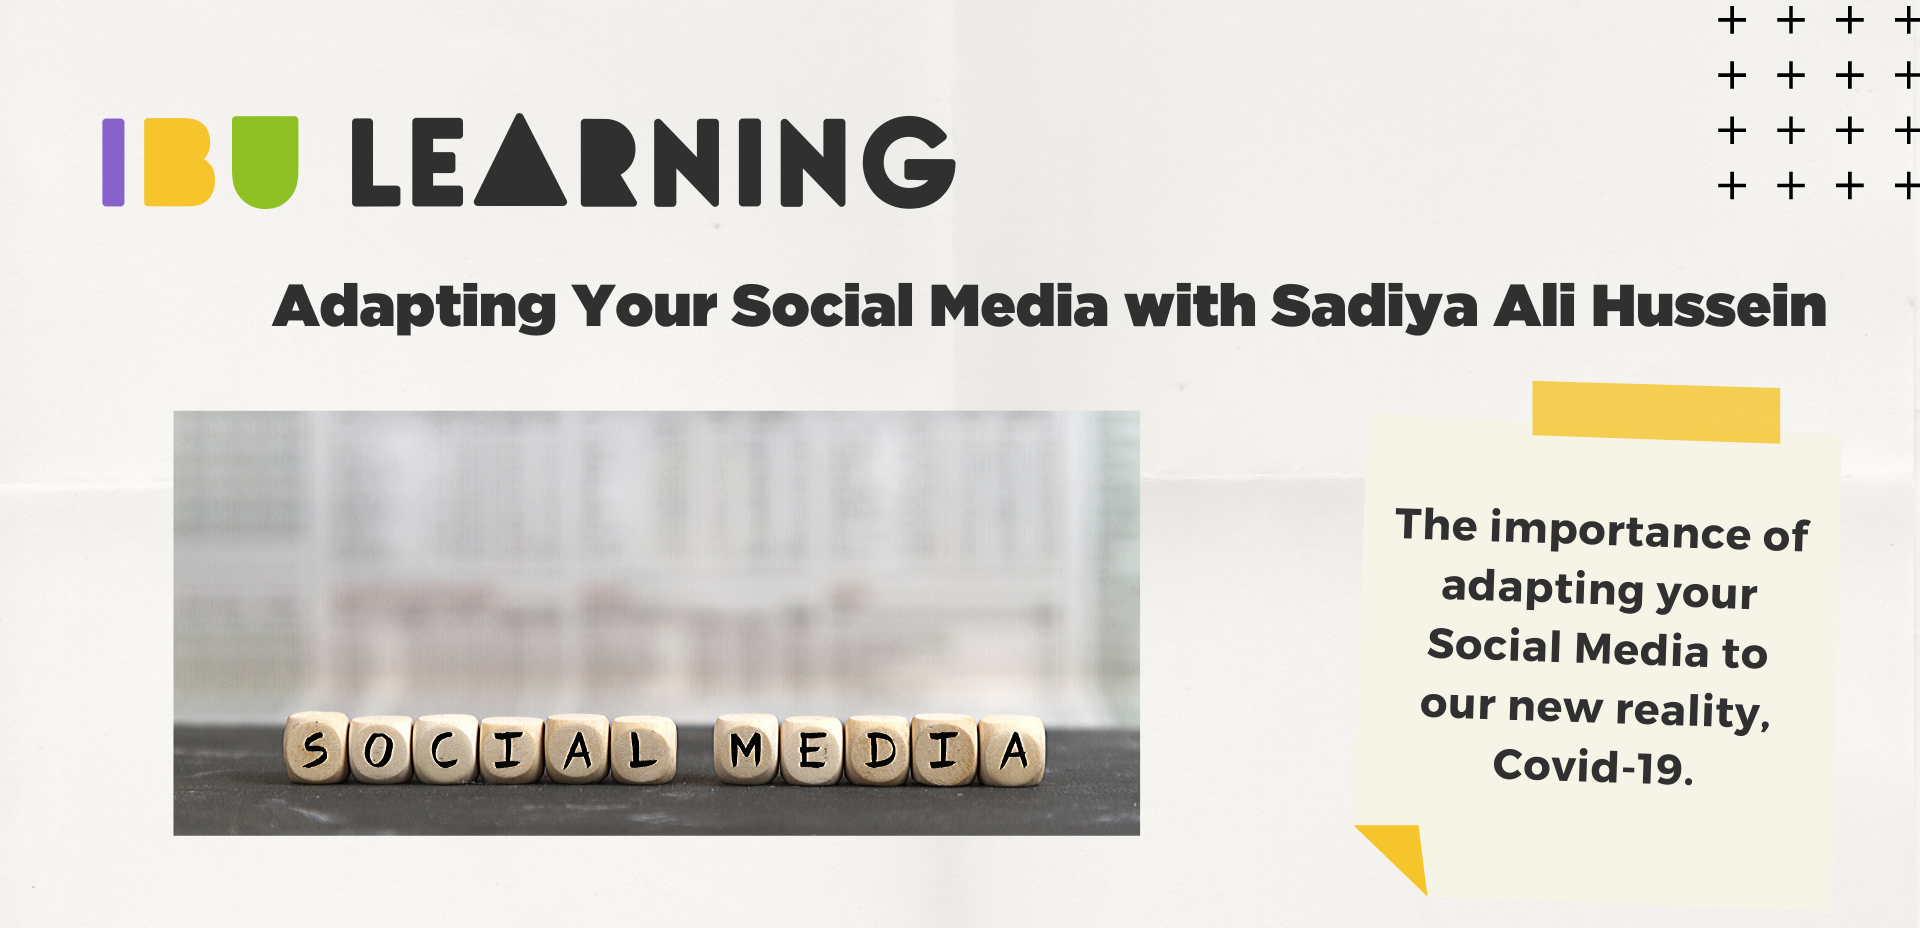 The importance of adapting your Social Media to our new reality, Covid-19 with Sadiya Ali Hussein